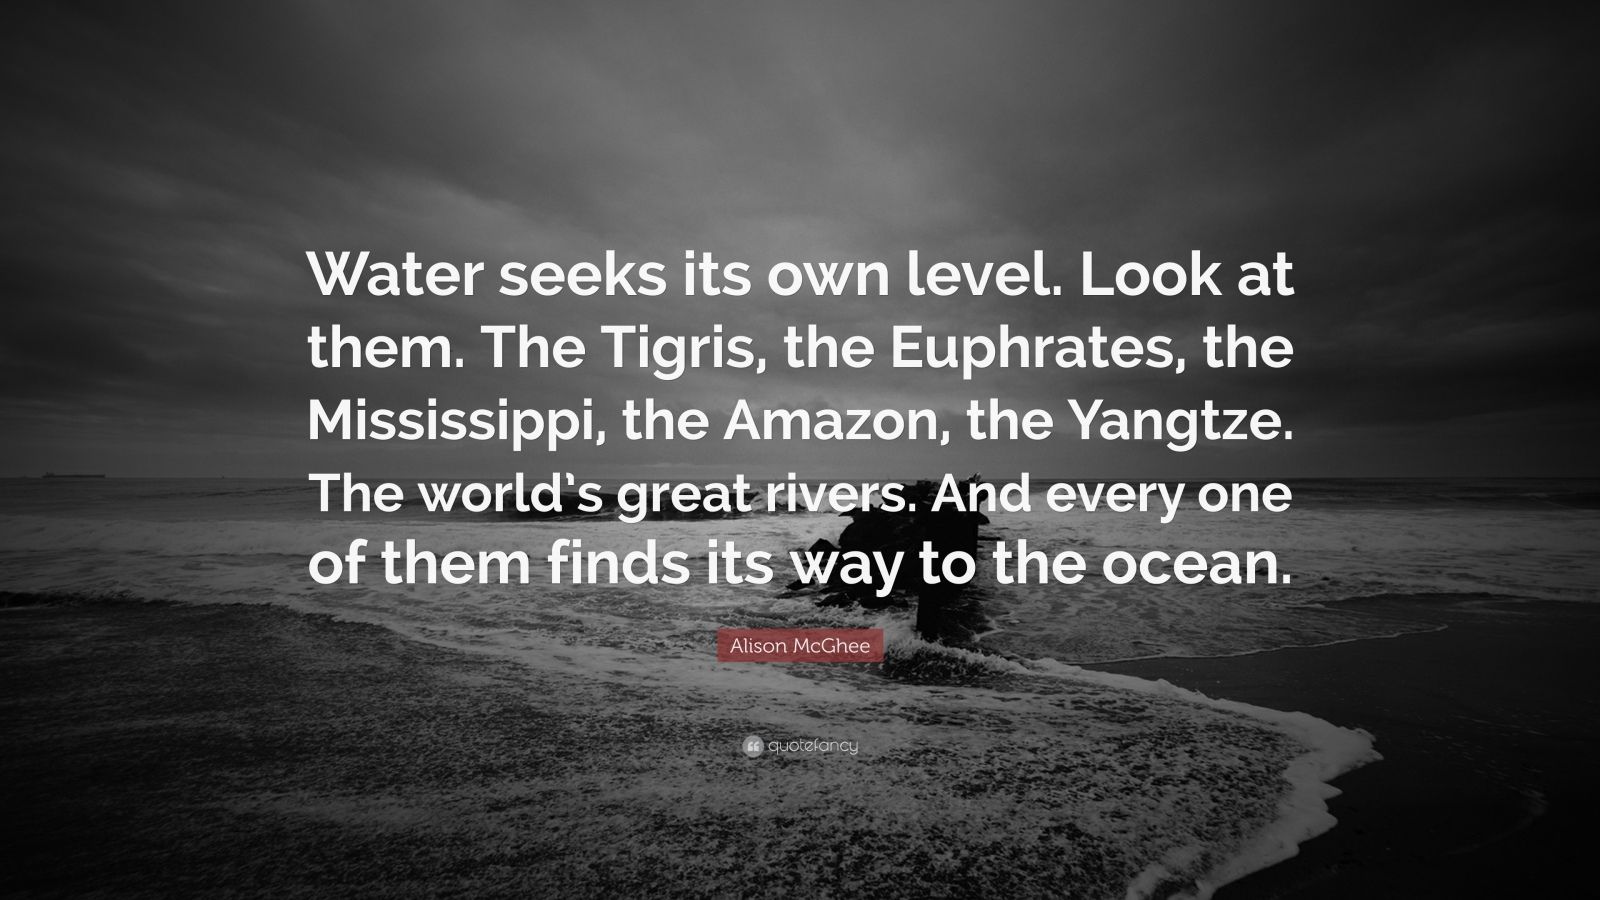 Alison McGhee Quote: "Water seeks its own level. Look at them. The Tigris, the Euphrates, the ...